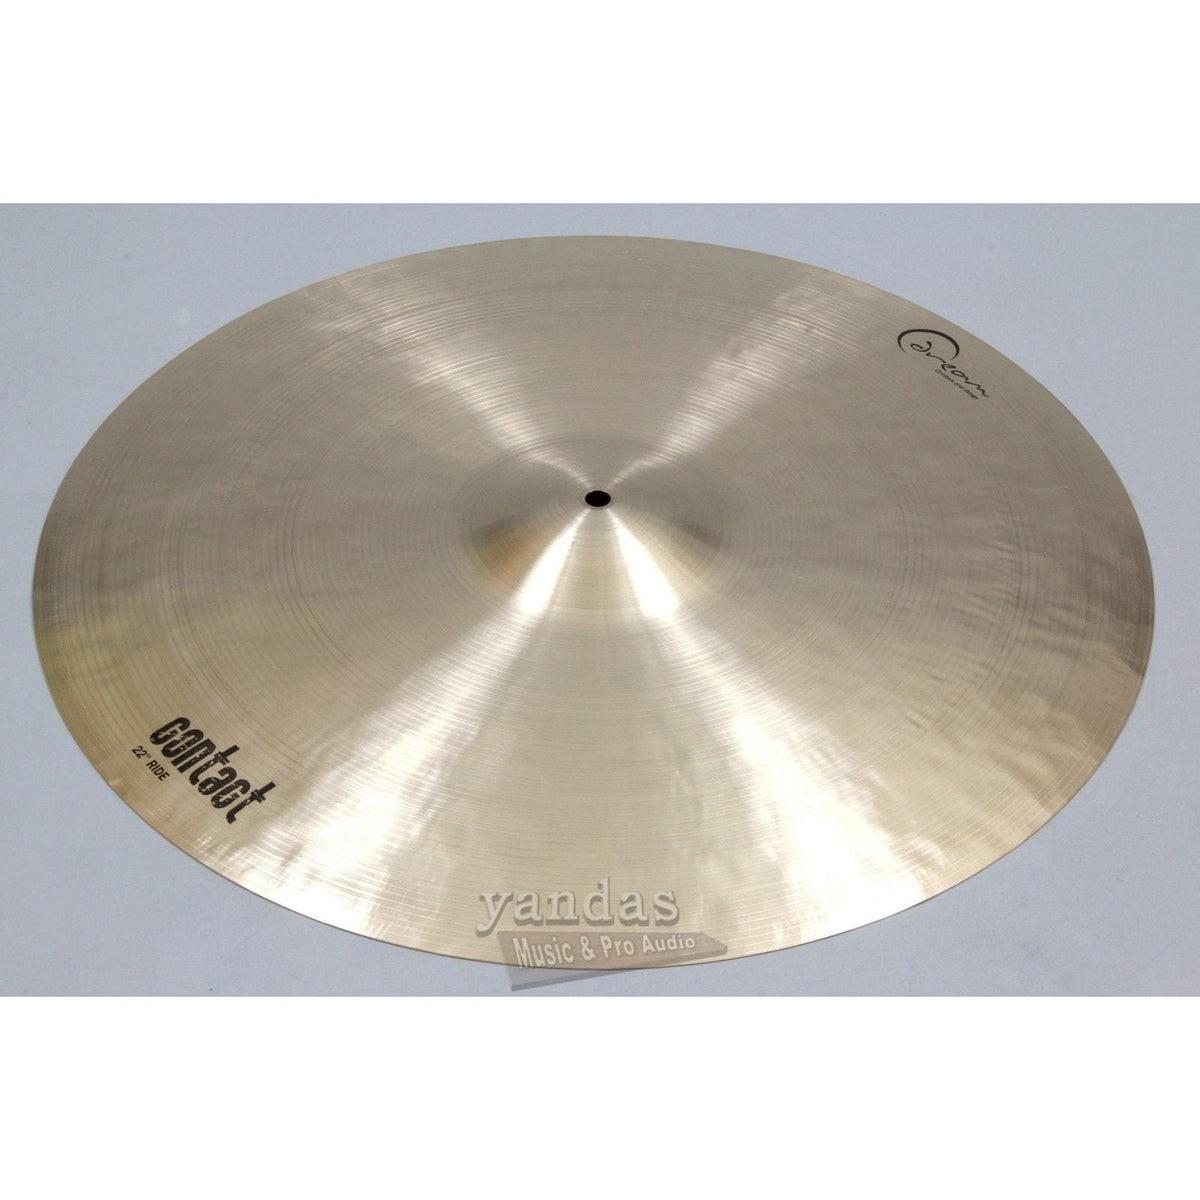 Dream Cymbals Contact Series Ride Cymbal 22 Inch